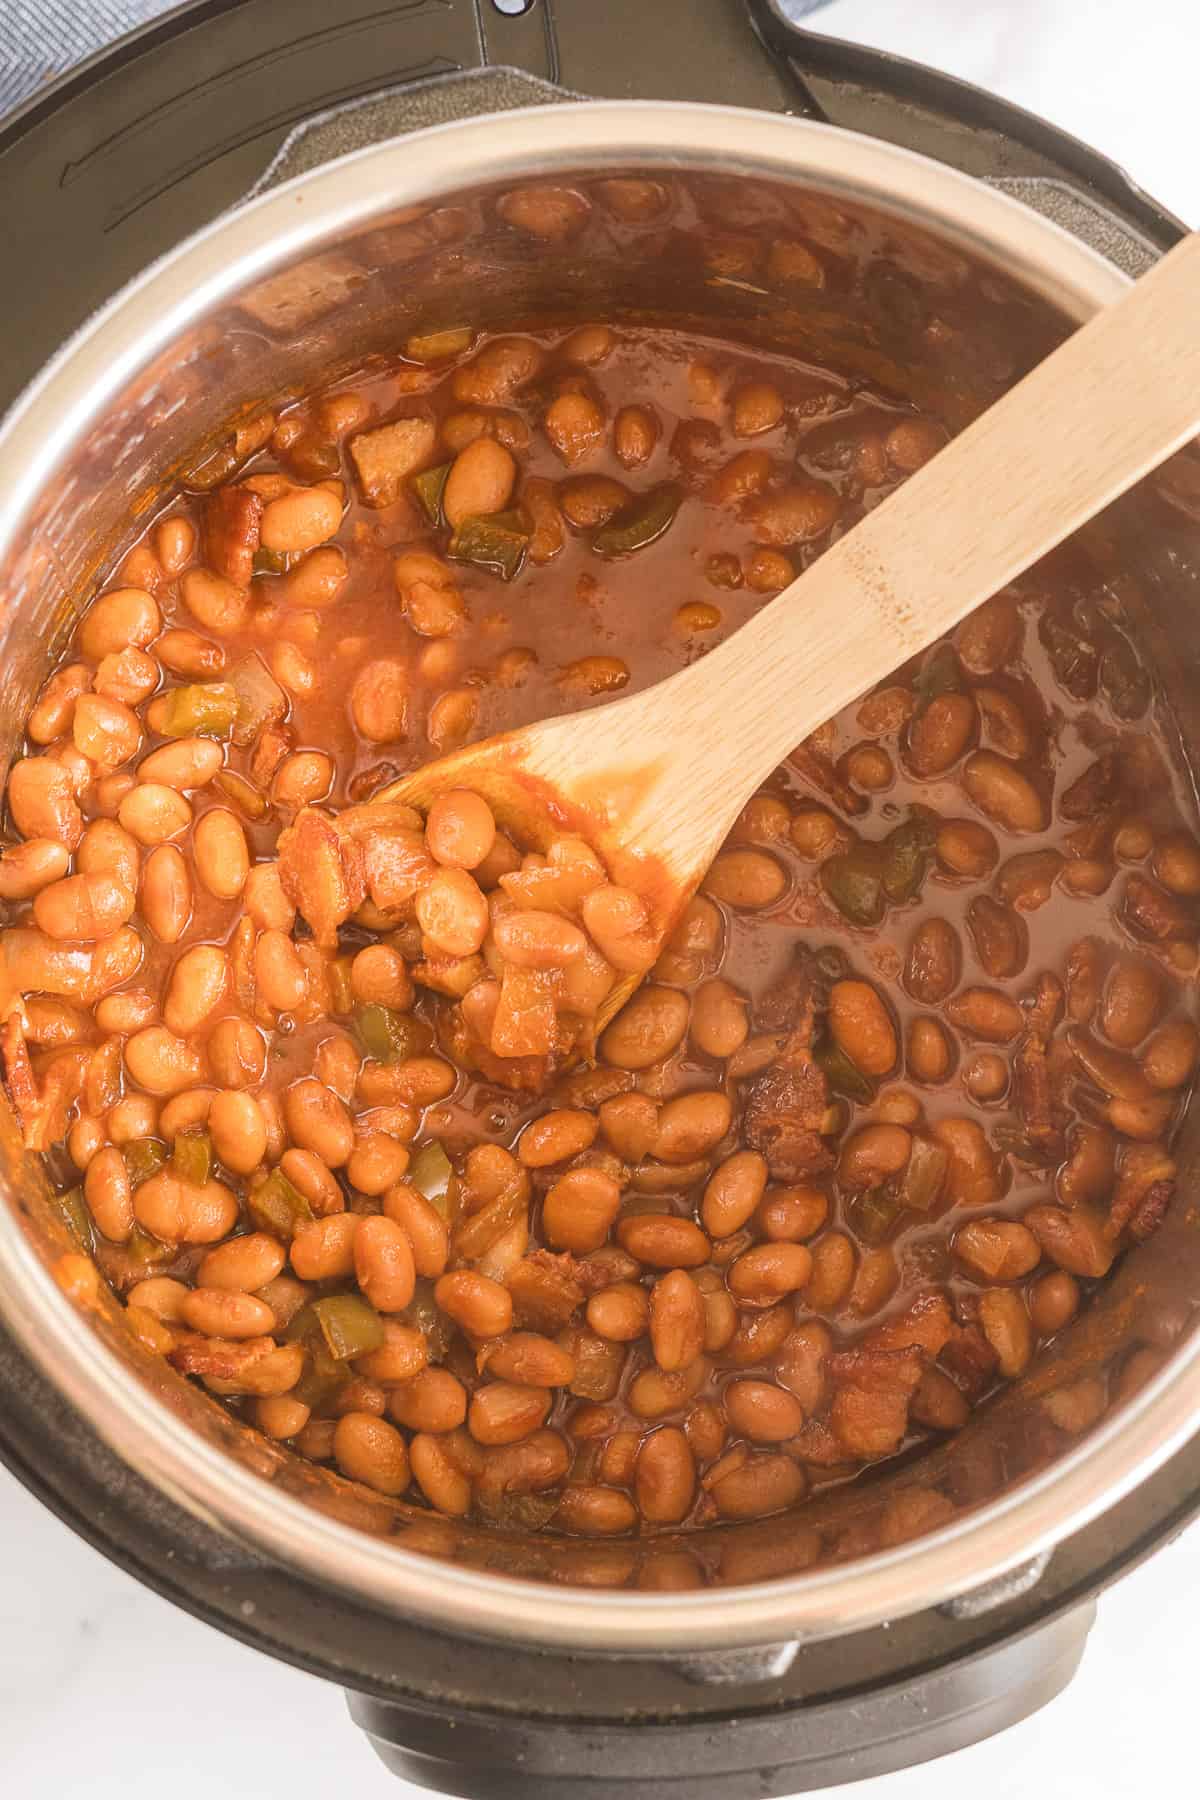 A wooden spoon stirs the baked beans in the Instant Pot.